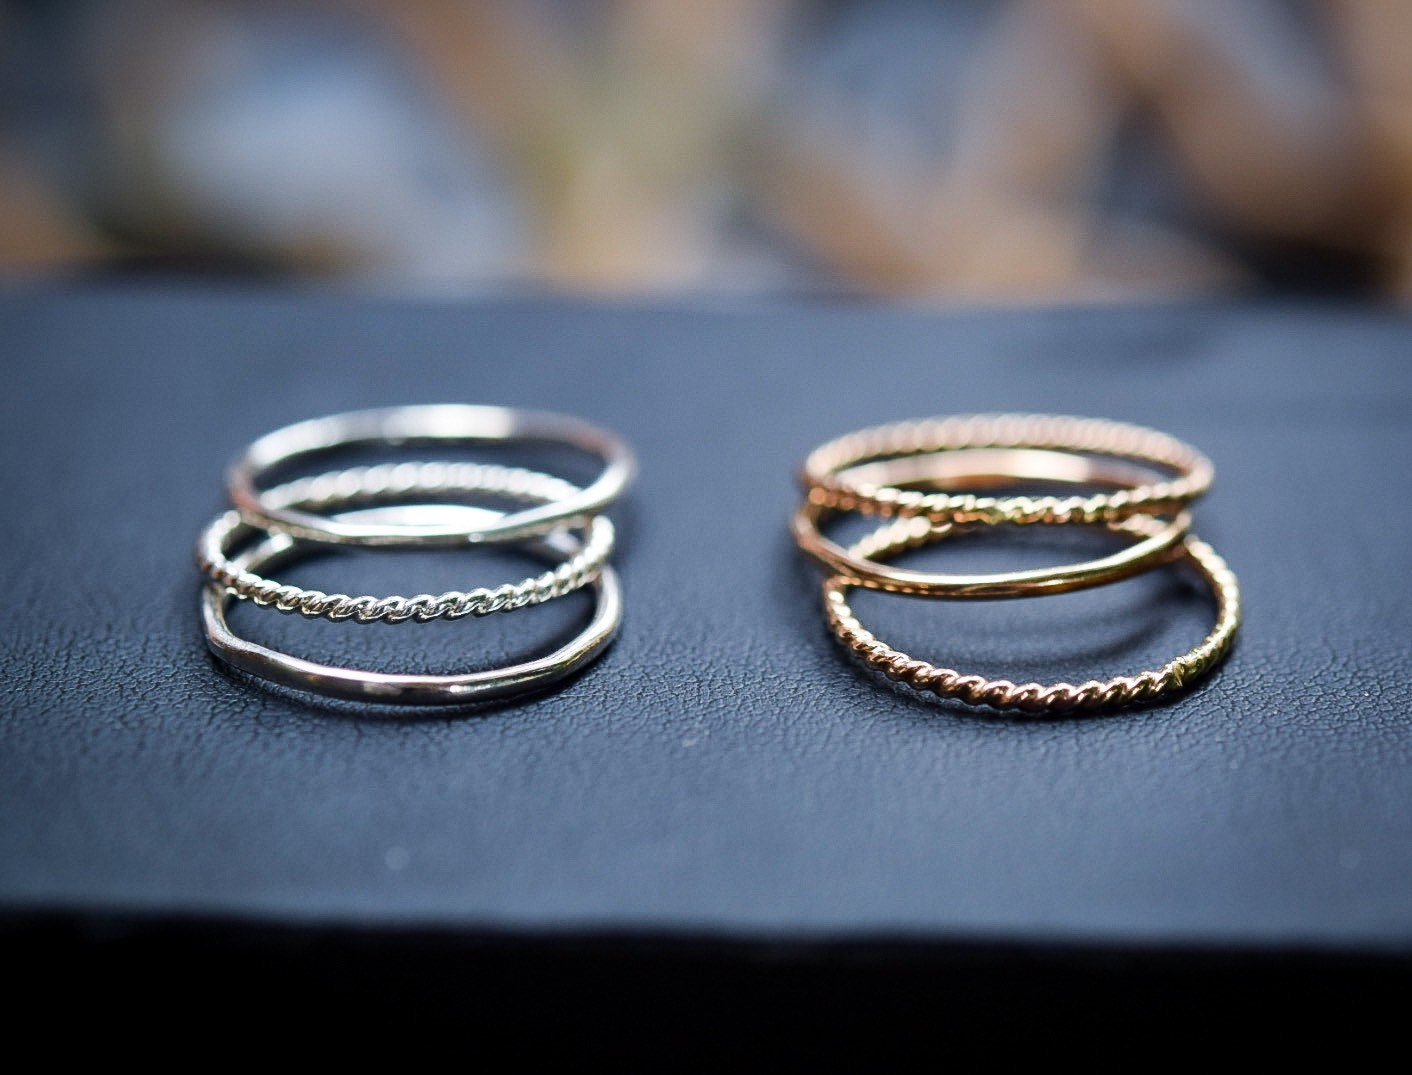 Stacking rings, sterling stack on the left, gold-filled stack on the right.